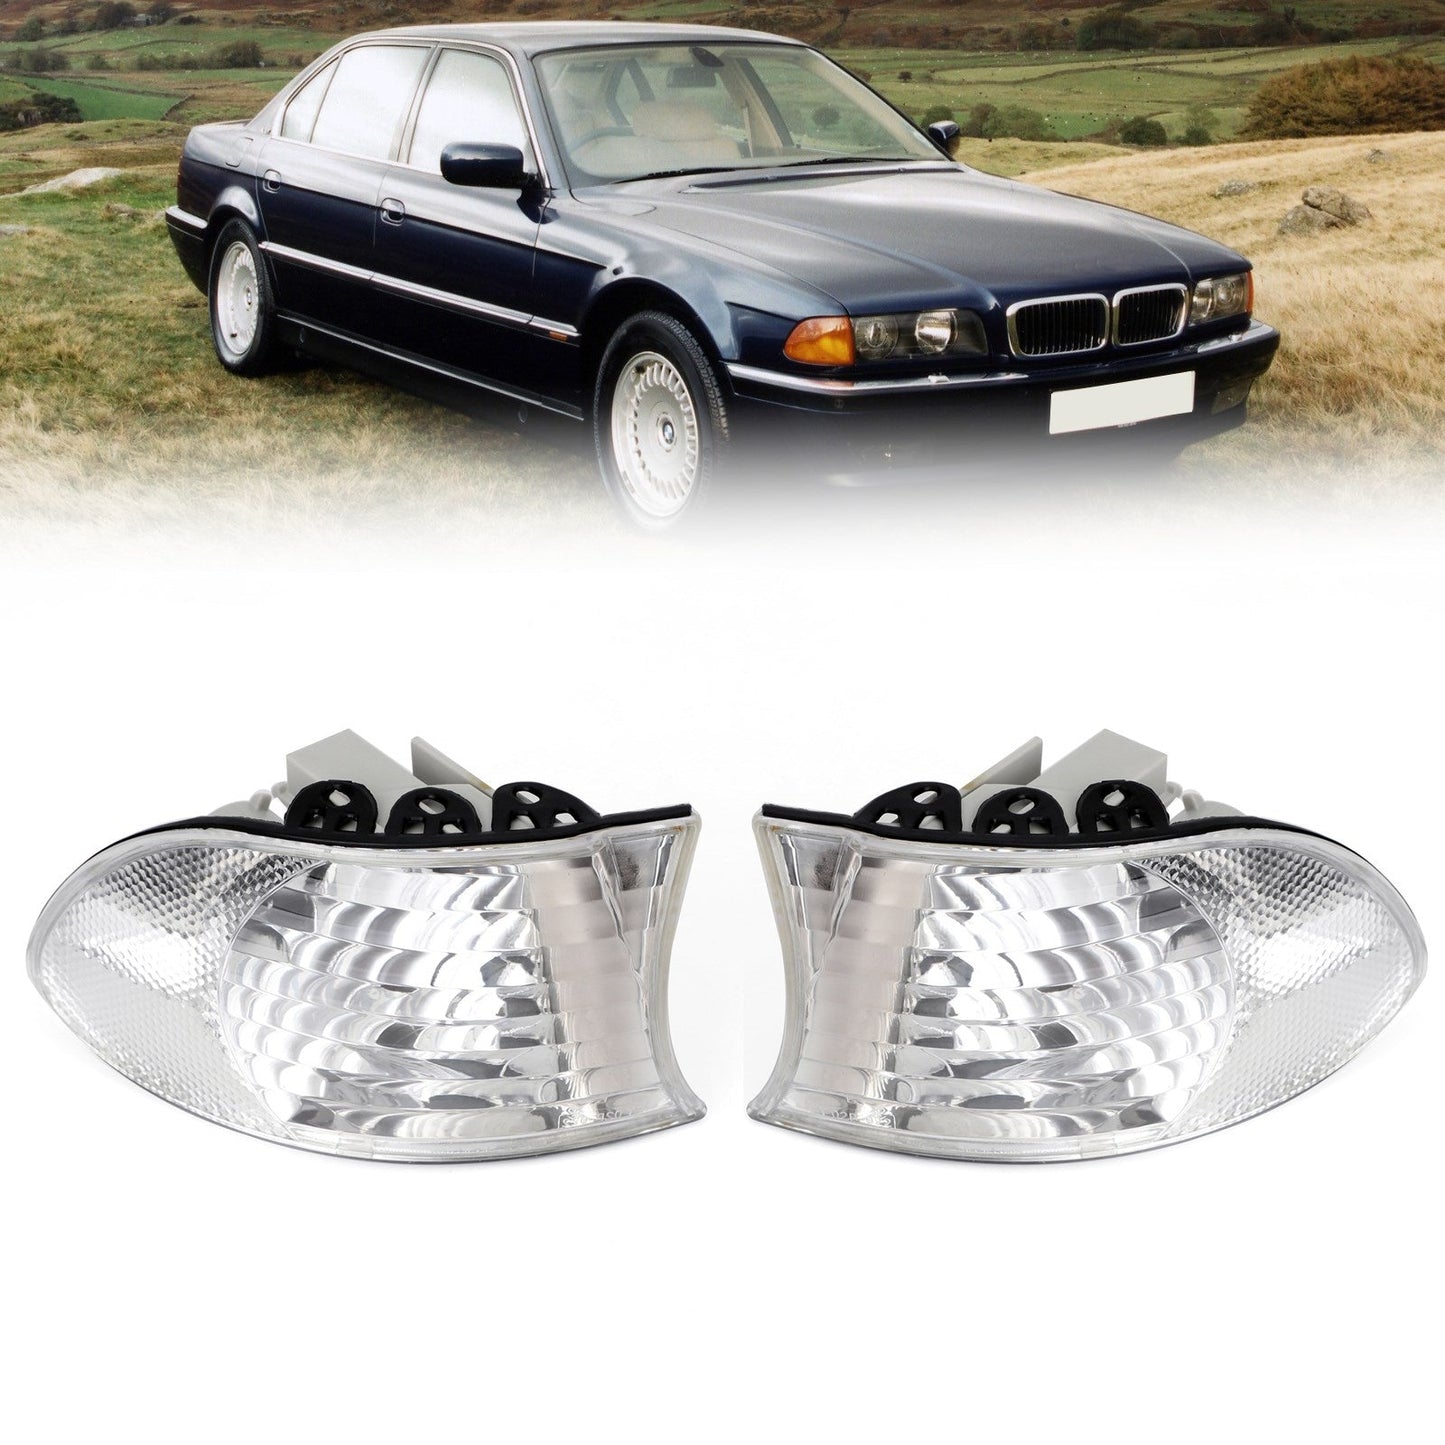 Corner Lights Parking Lamps Pair For BMW 7-Series E38 1999-2001 White